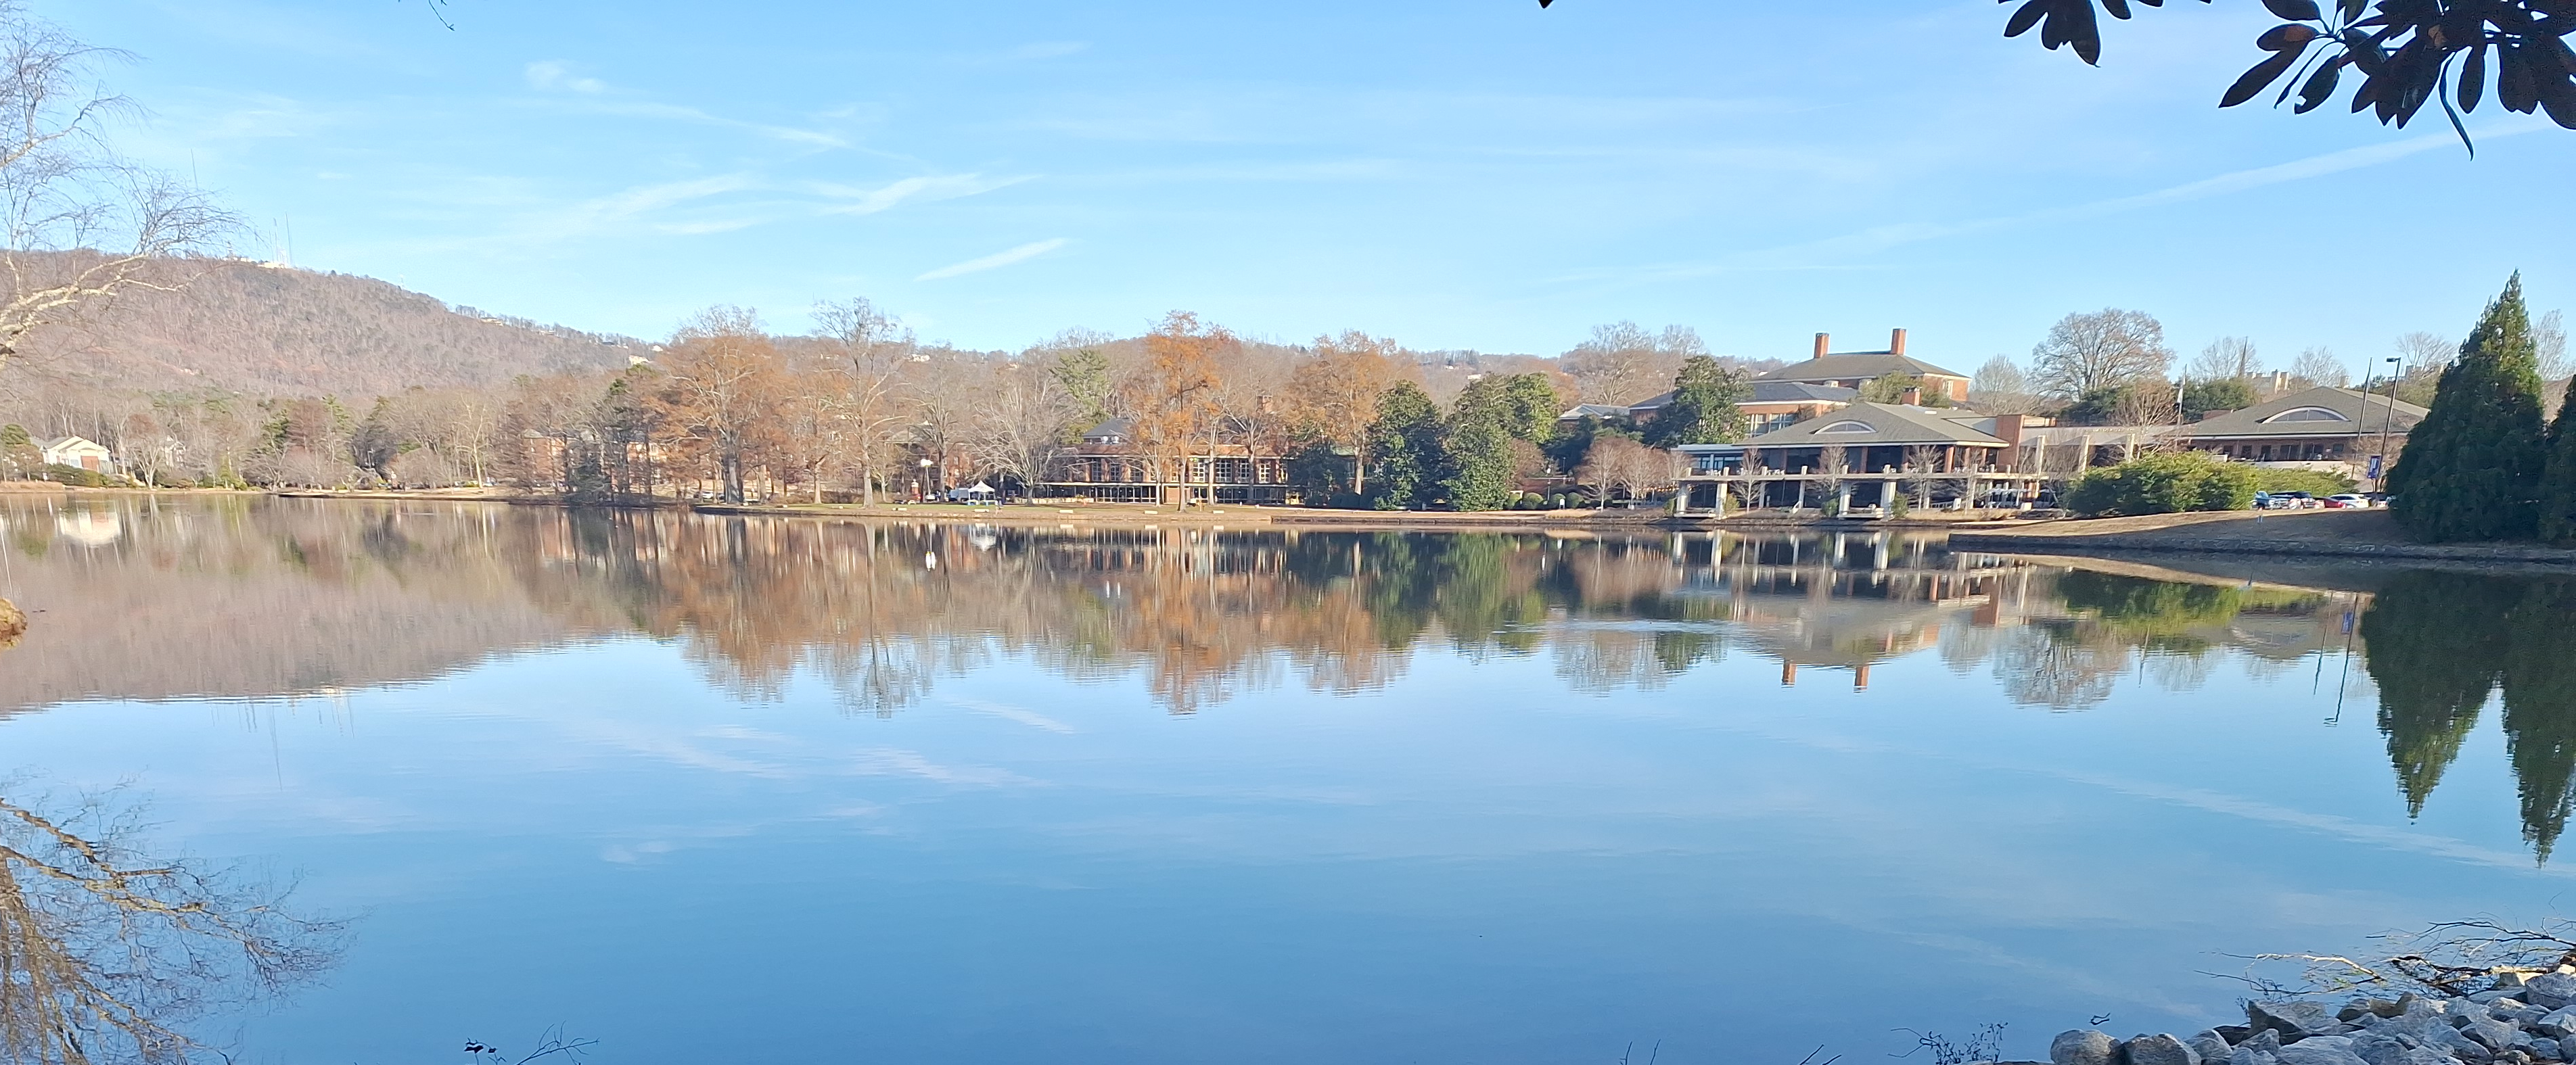 overlooking the lake on the Furman campus